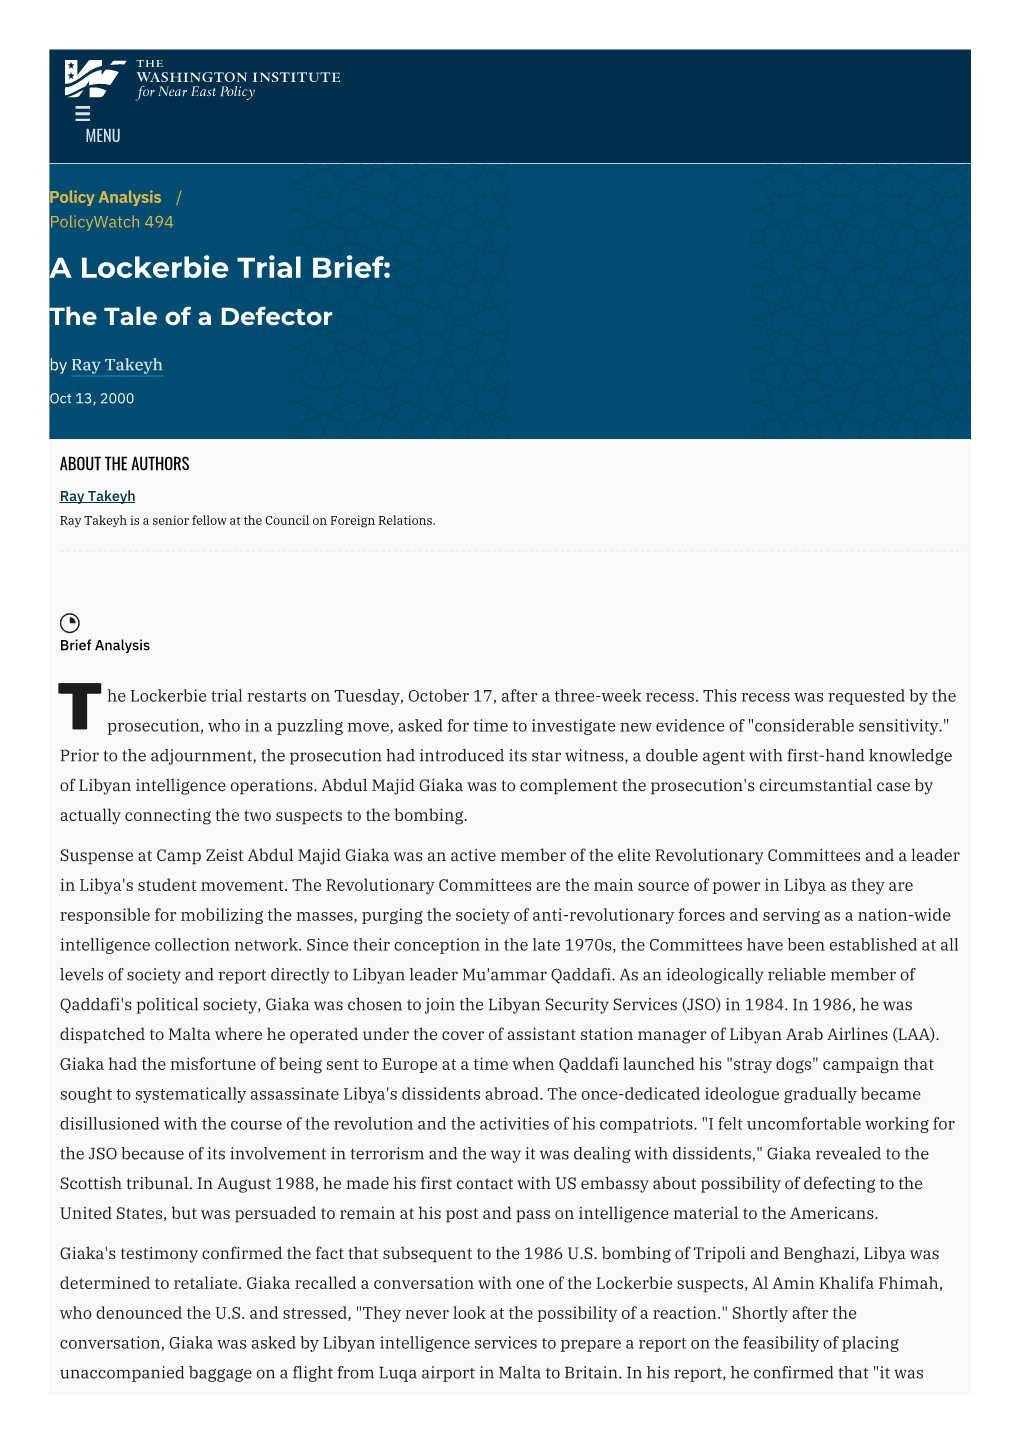 A Lockerbie Trial Brief: the Tale of a Defector | the Washington Institute